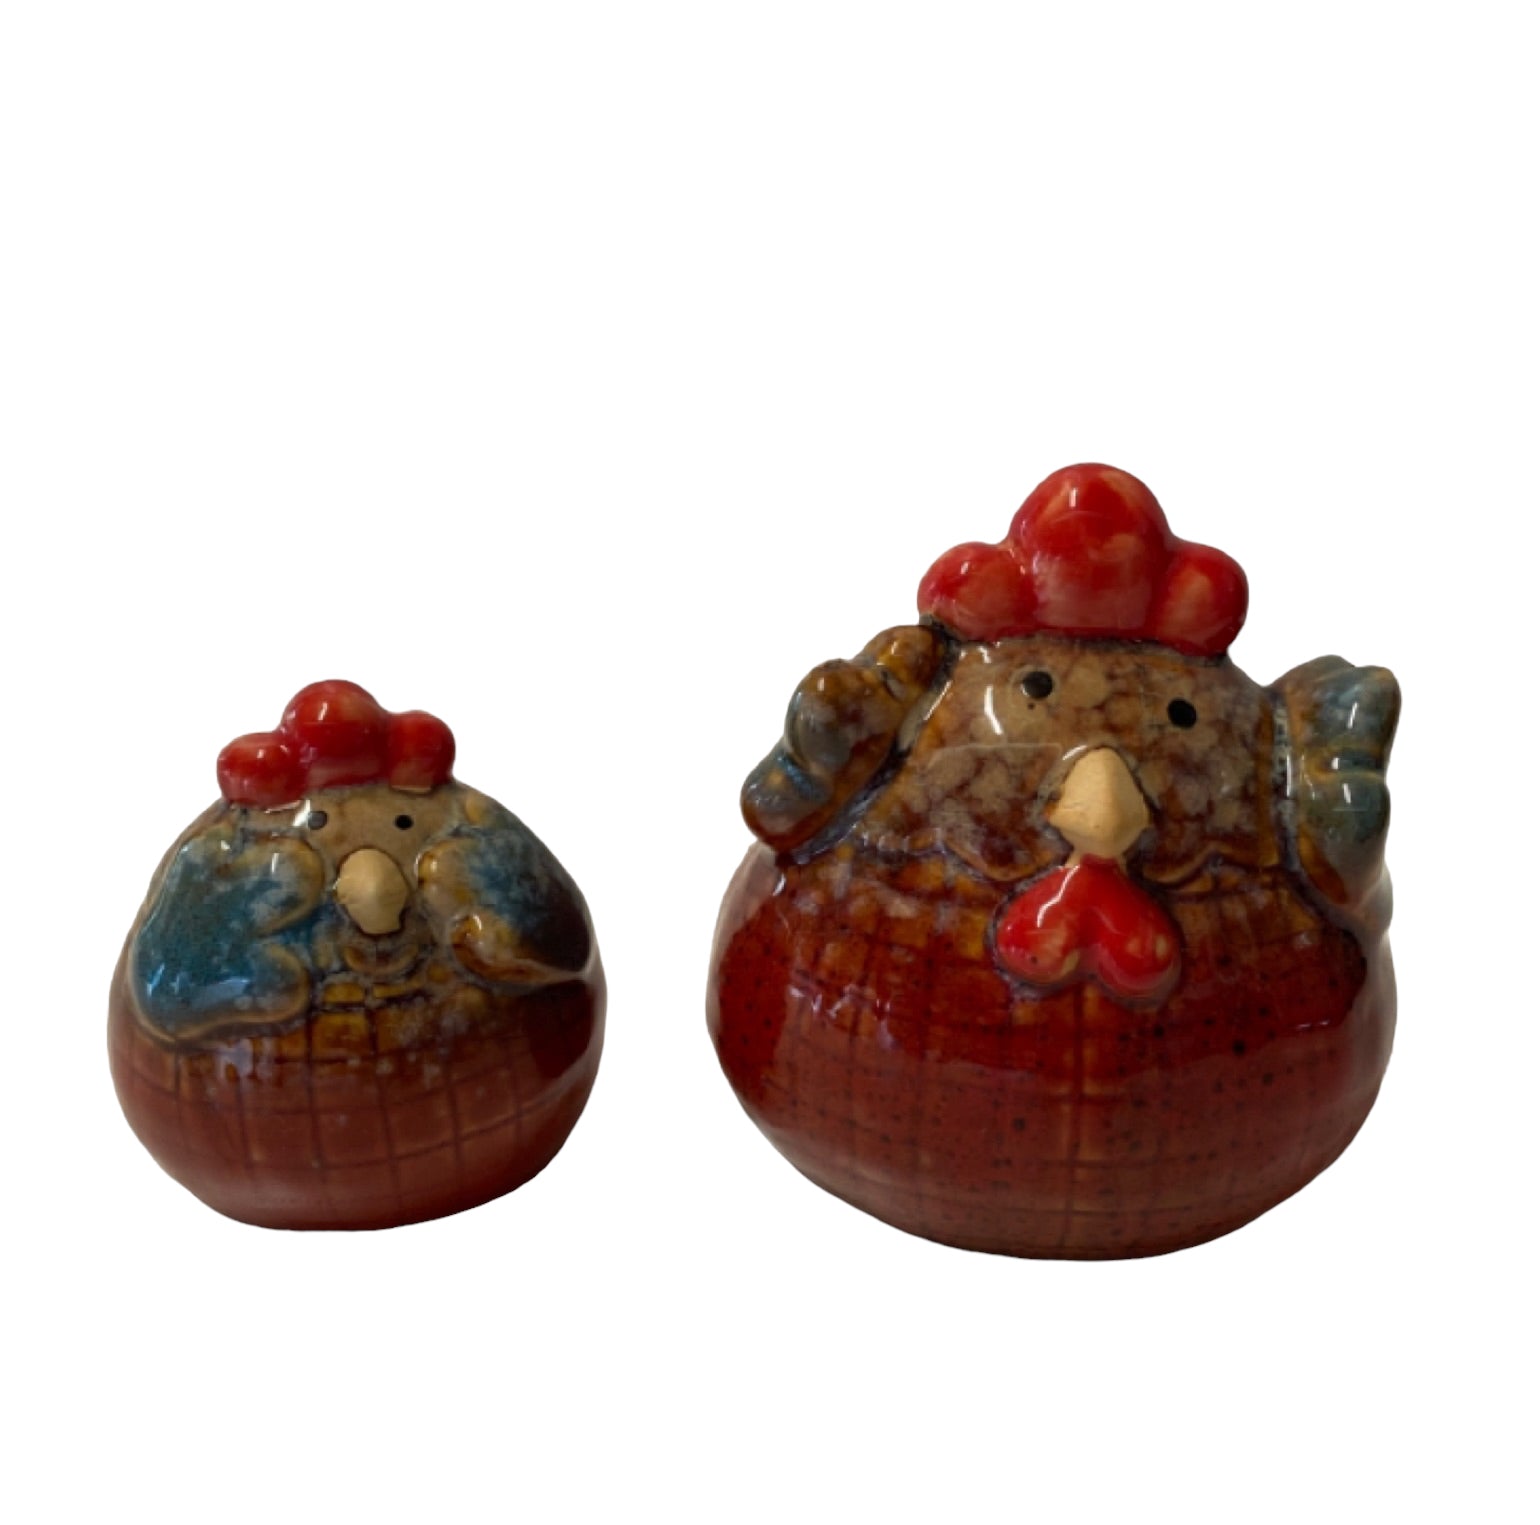 Chicken Rooster Set of 2 Tartan Ornament - The Renmy Store Homewares & Gifts 